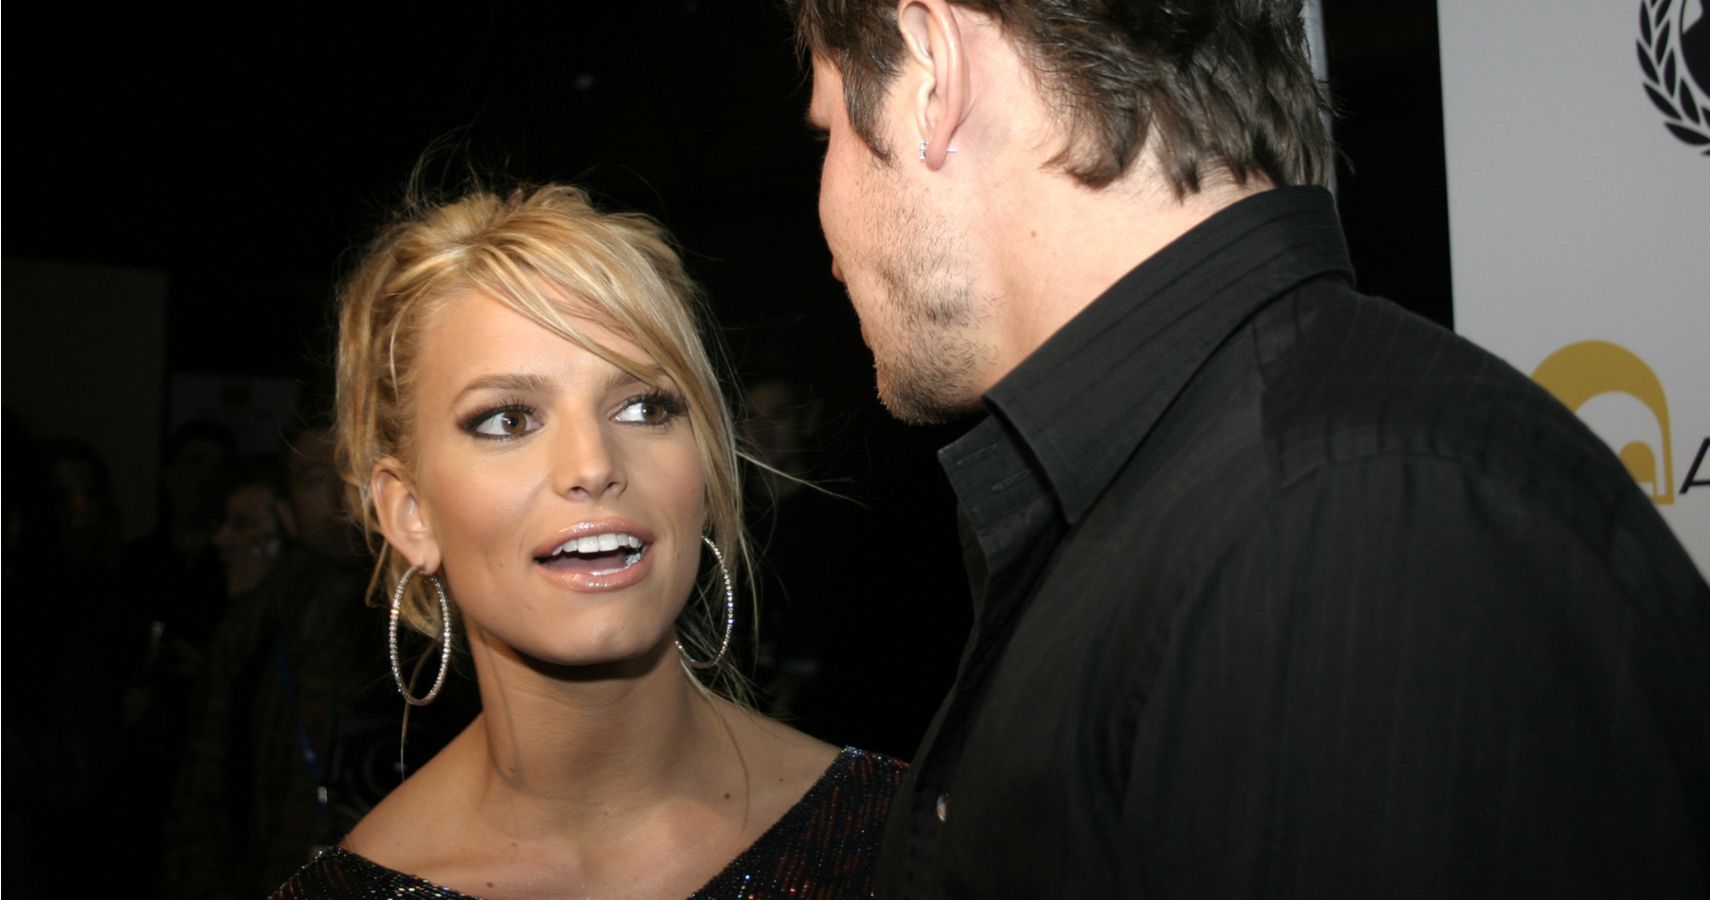 02/11/2005 - Hollywood - Jessica Simpson and Nick Lachey at the Tsunami Benefit Concert and Launch Event for the Will.I.am Music Group at Avalon.